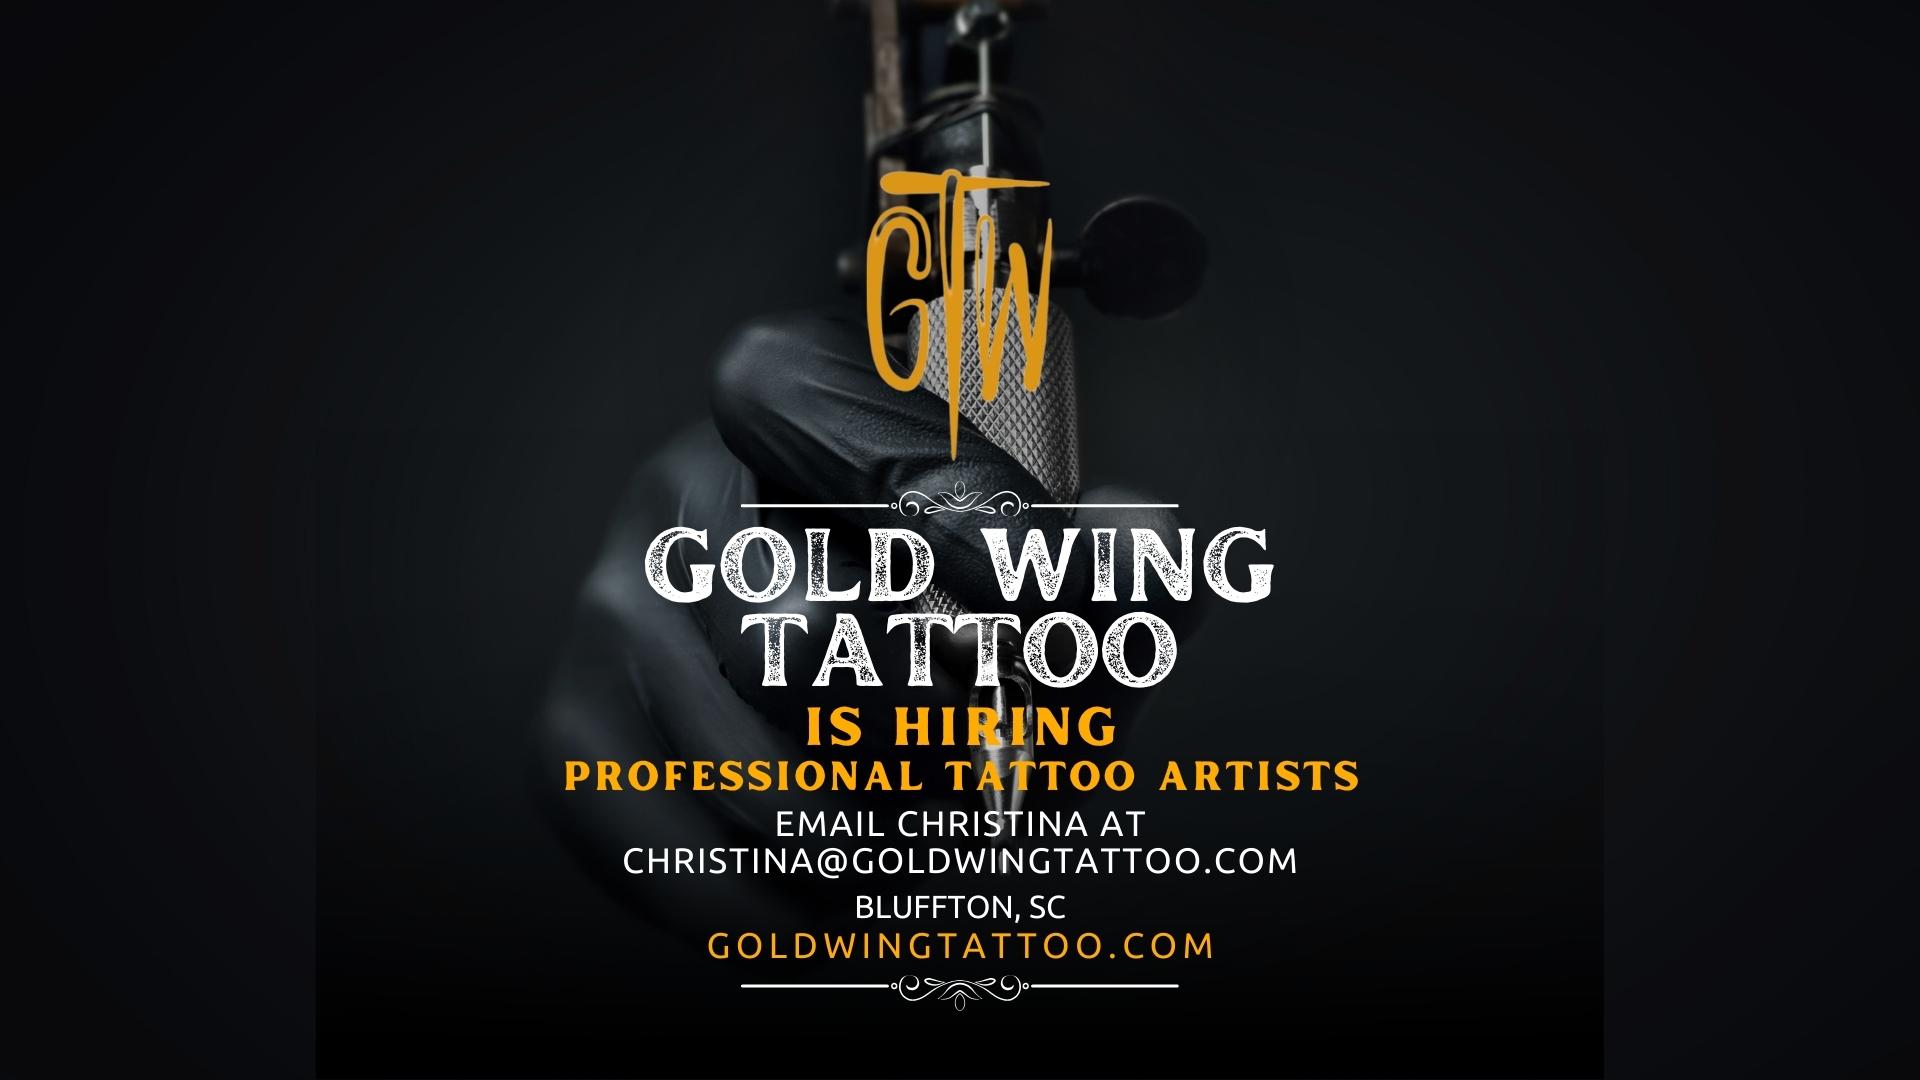 Hiring a motivated tattoo artist! Well established tattoo shop looking to  continue creating great tattoos and better experiences. Contact... |  Instagram